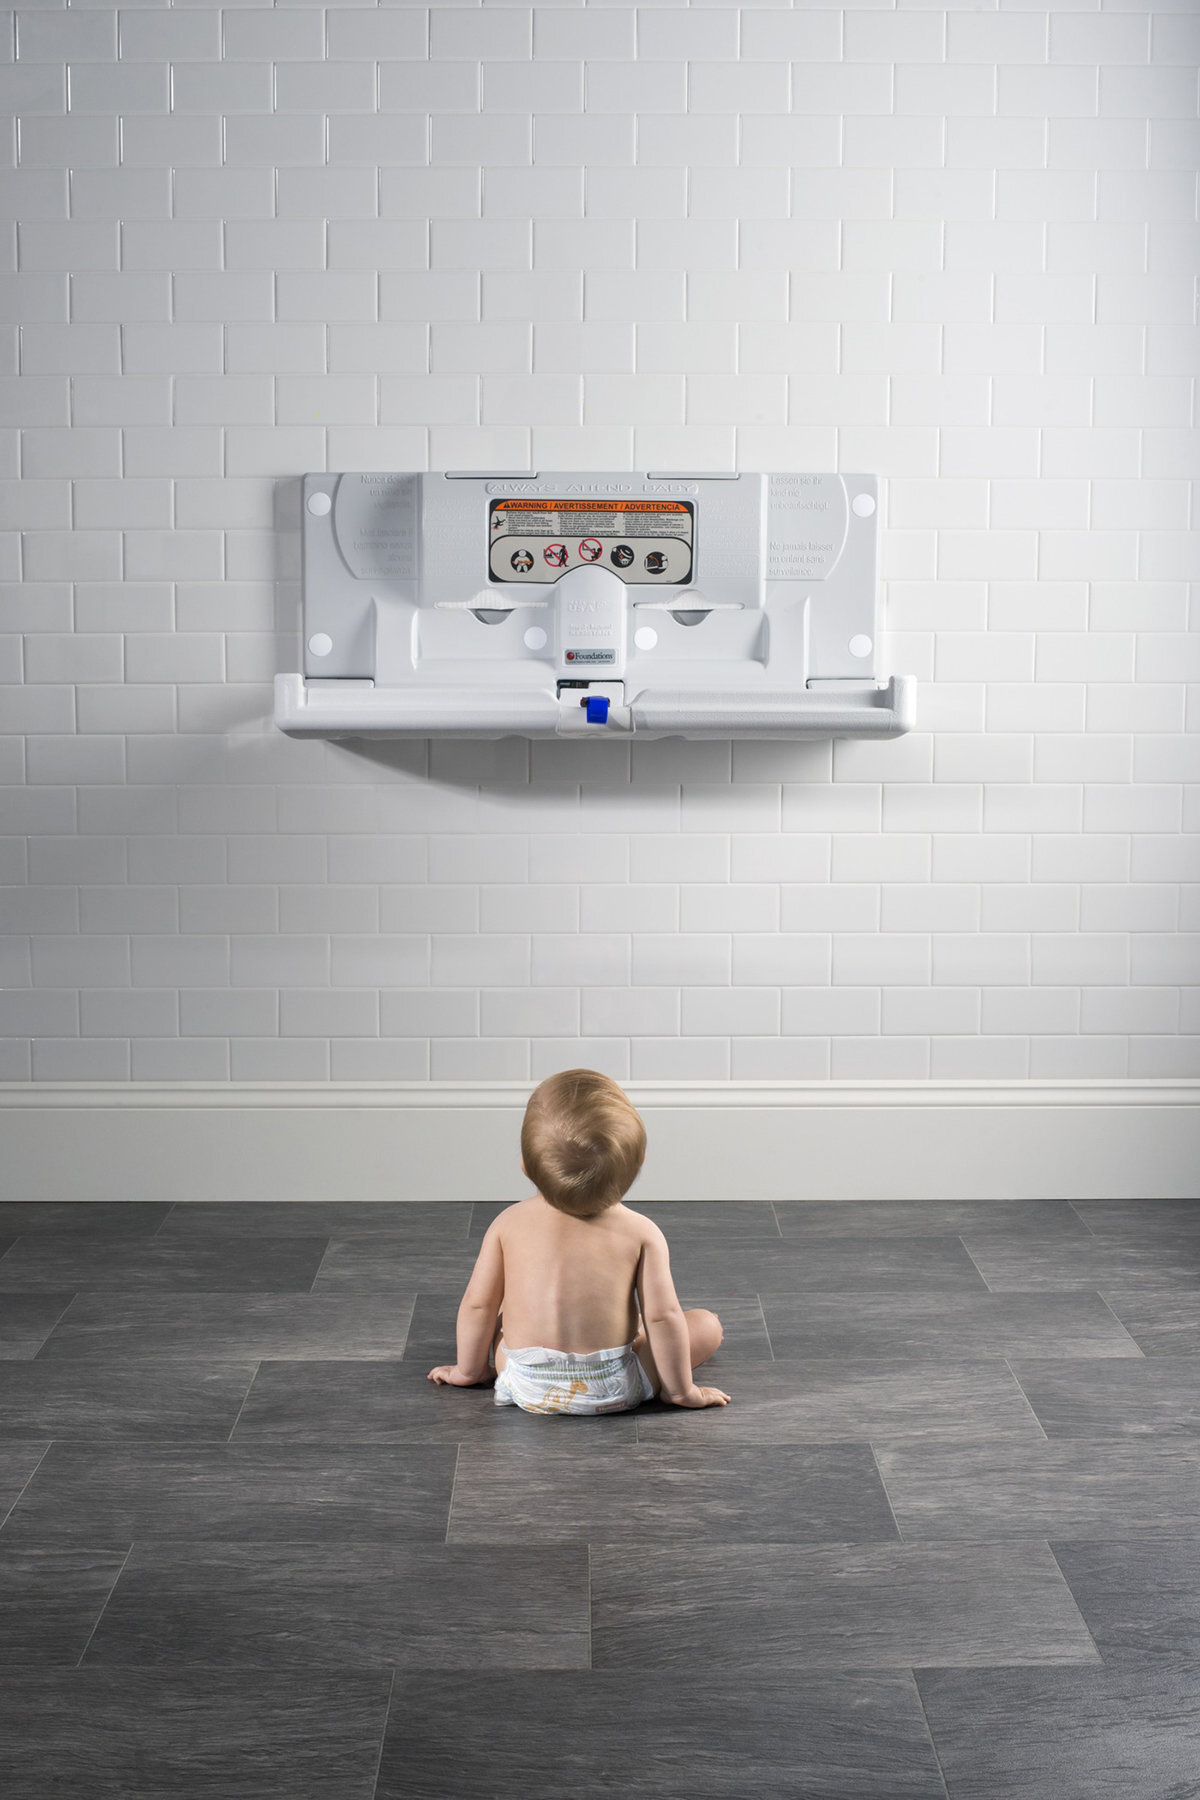 Advertising photograph of a baby with a washroom changing station